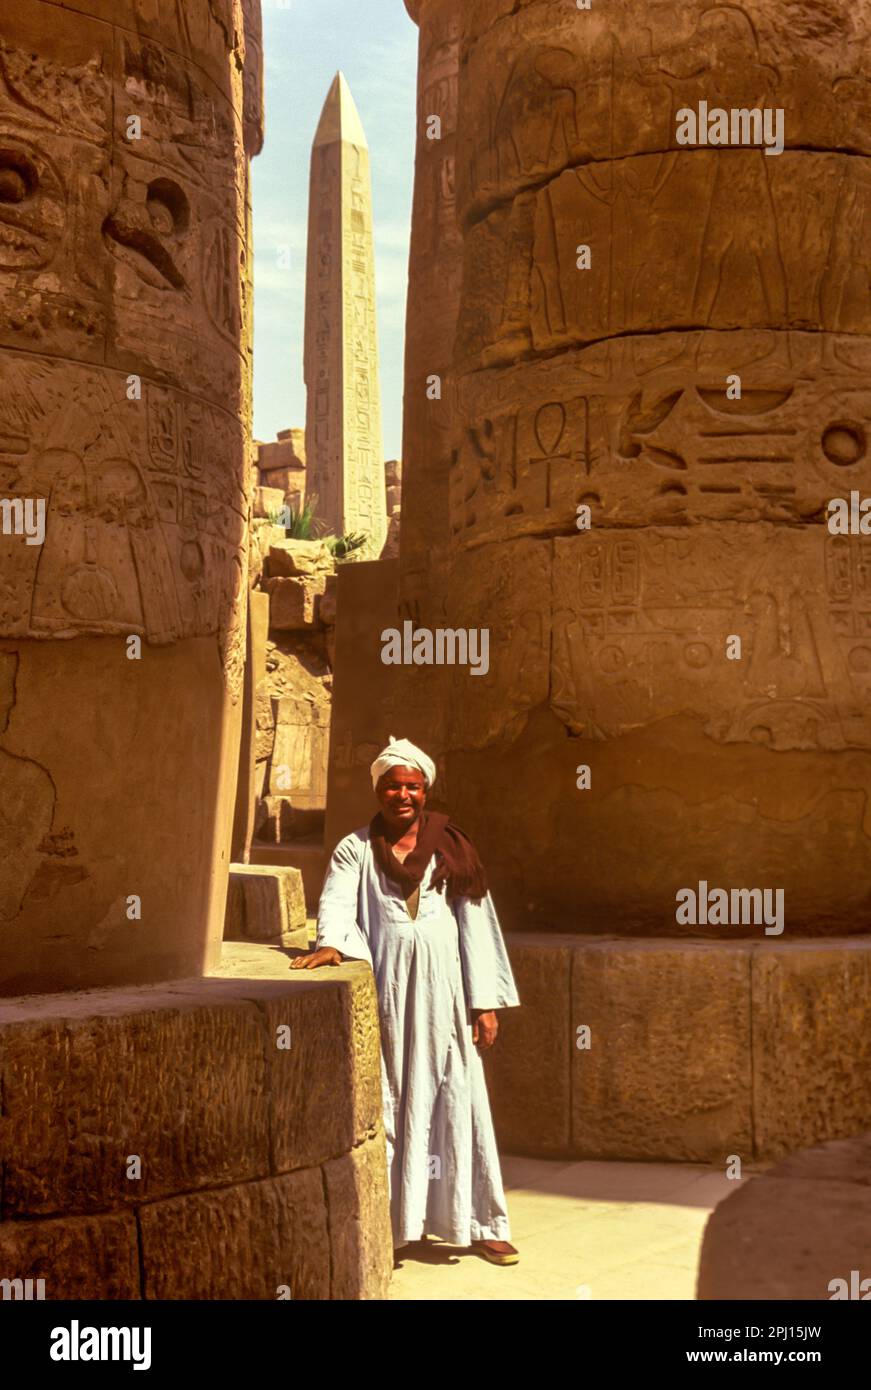 Salle hypostyle GUIDE GRAND TEMPLE D'AMON KARNAK LUXOR EGYPTE RUINES Banque D'Images